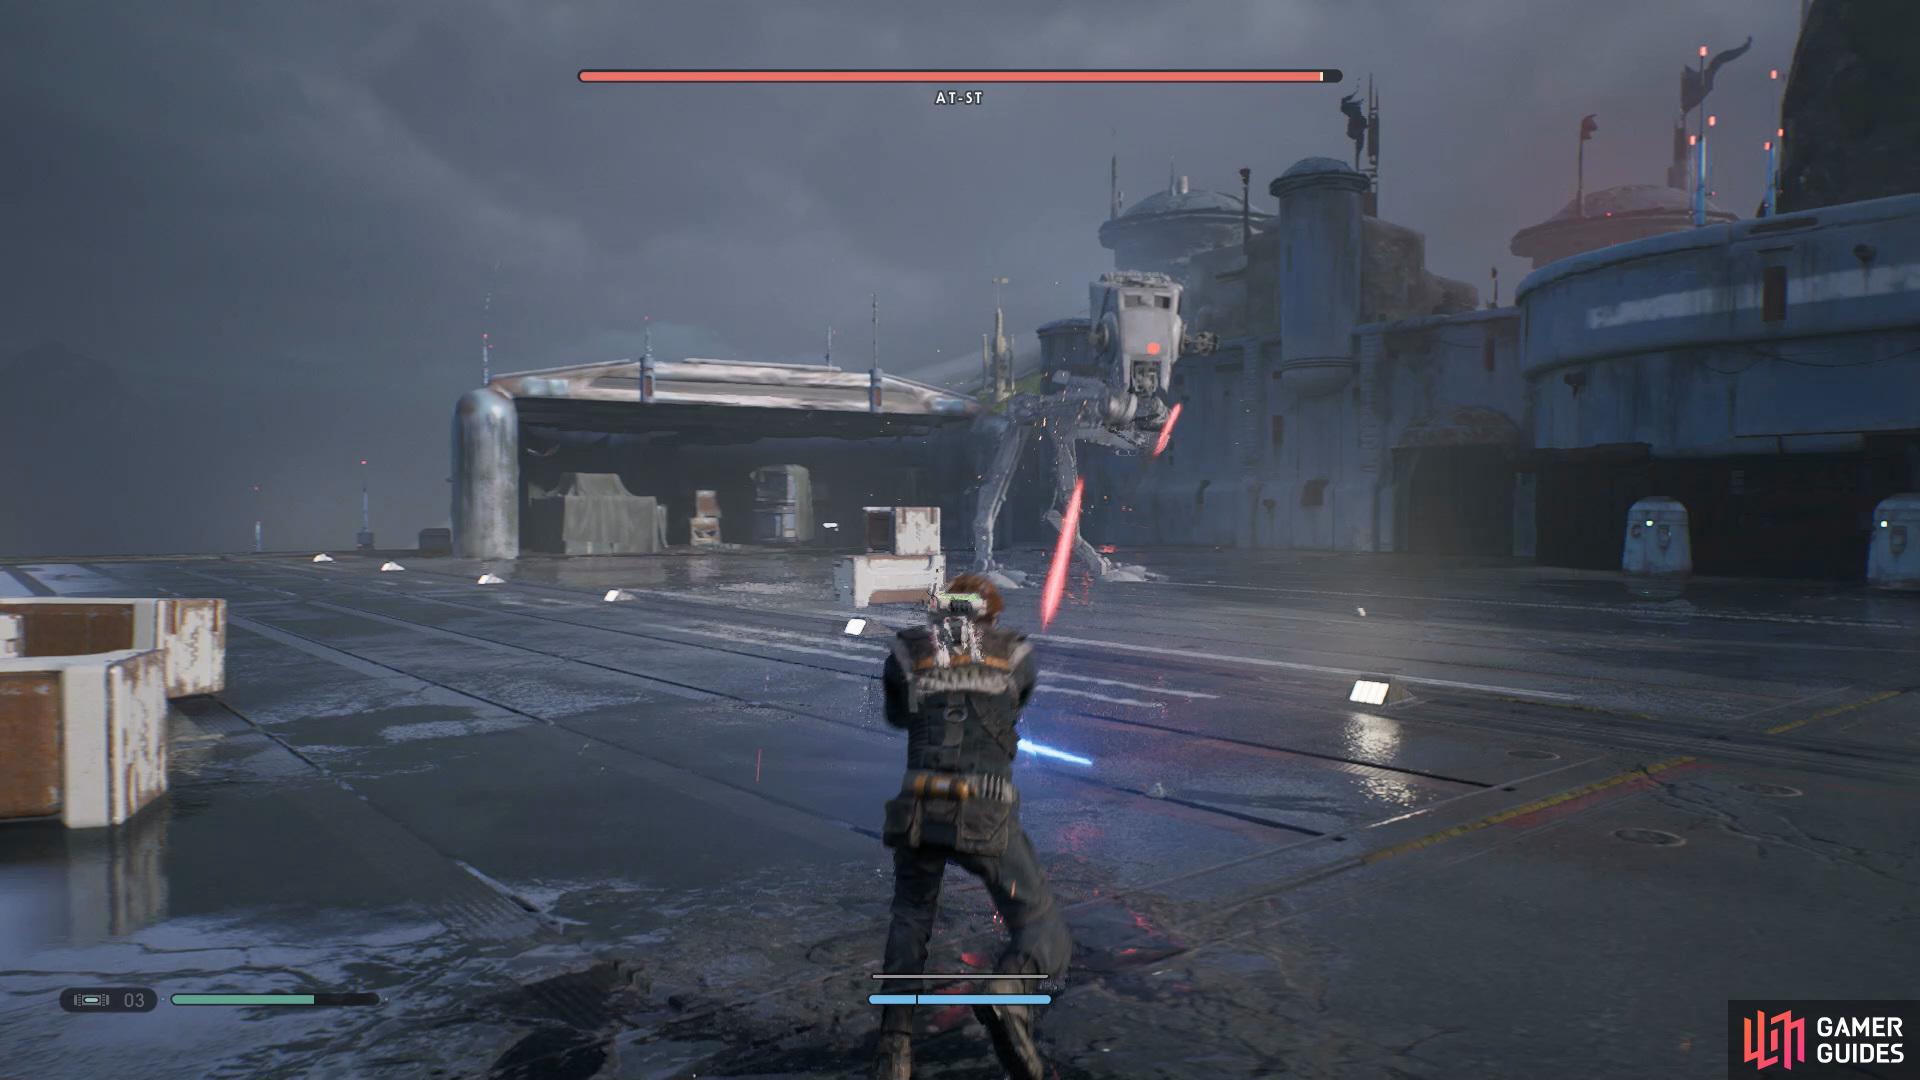 Use your Lightsaber to deflect any bullets back at the AT-ST